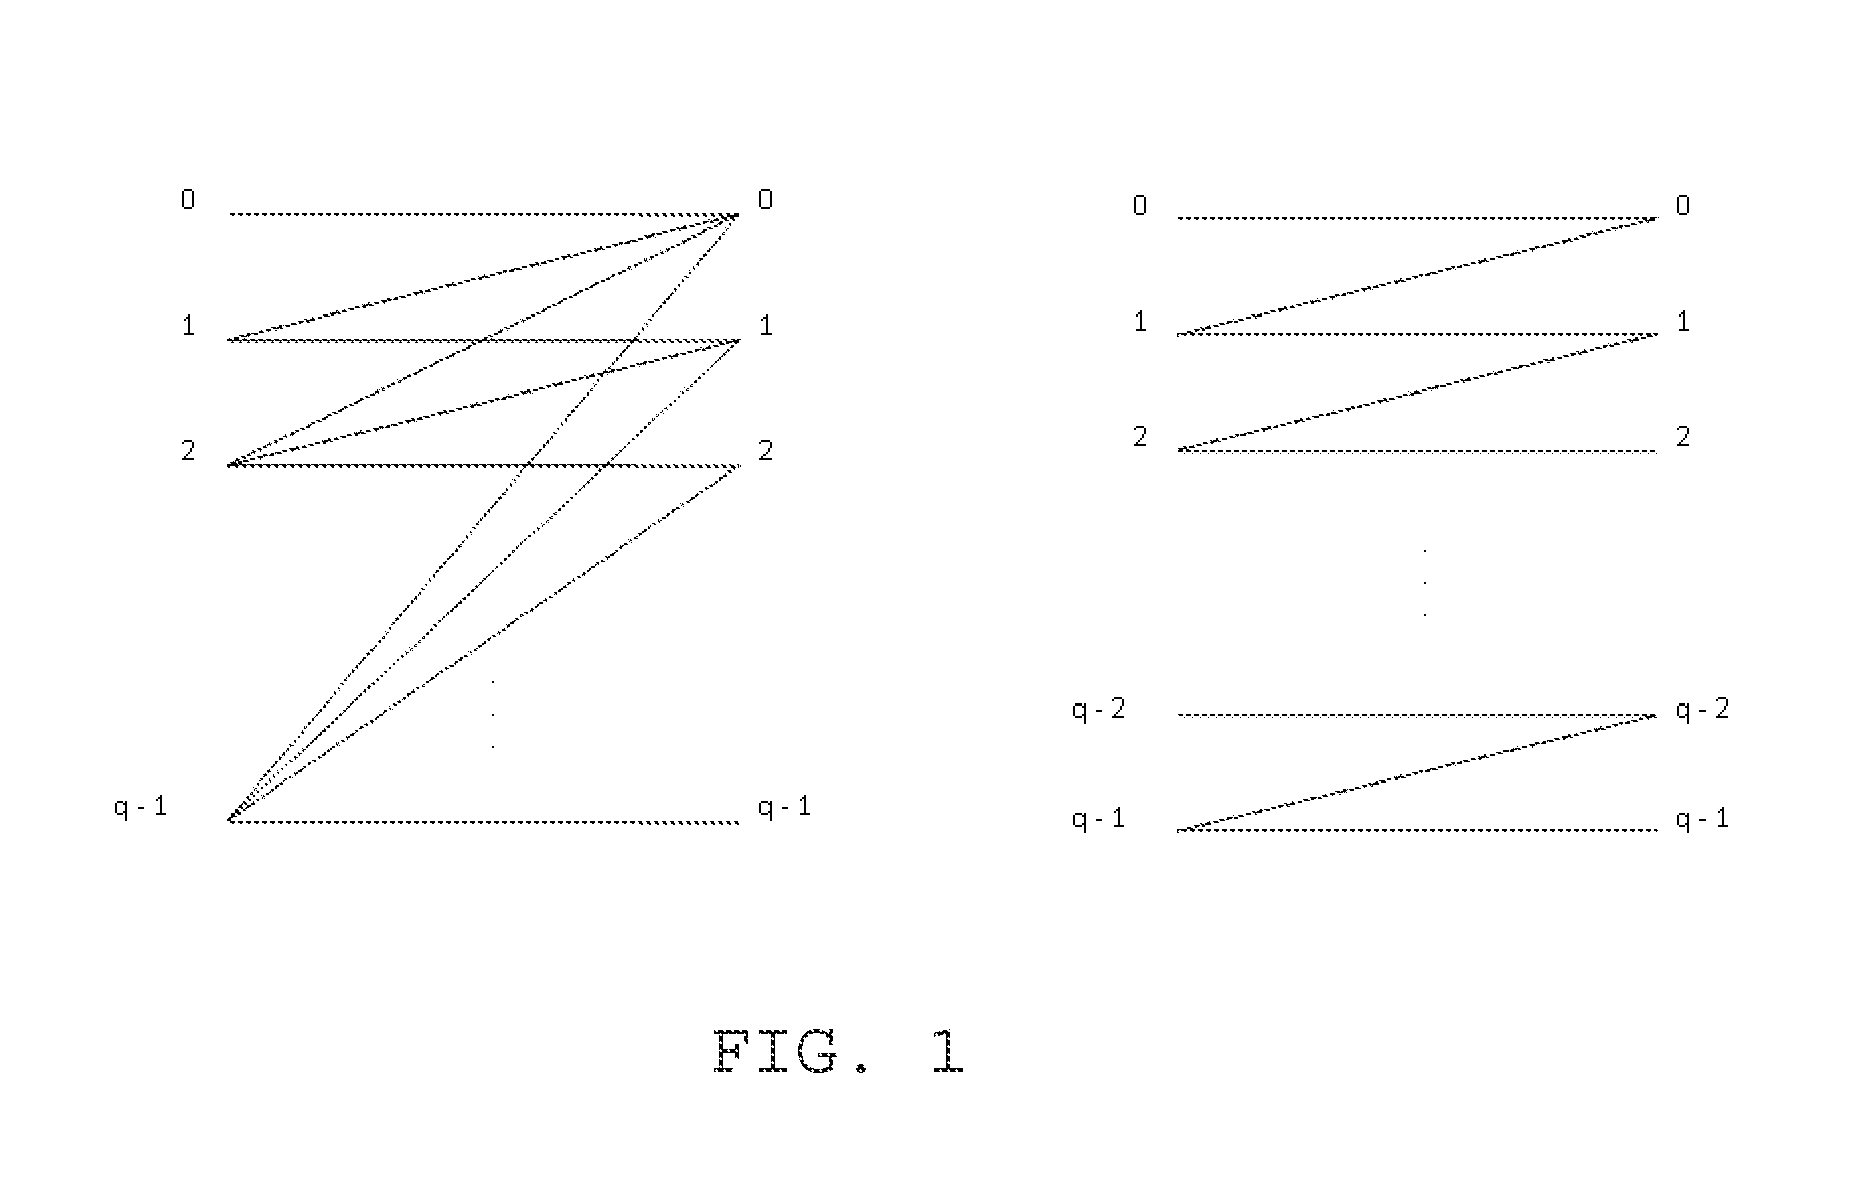 System and Method Having Optimal, Systematic q-Ary Codes for Correcting All Asymmetric and Symmetric Errors of Limited Magnitude